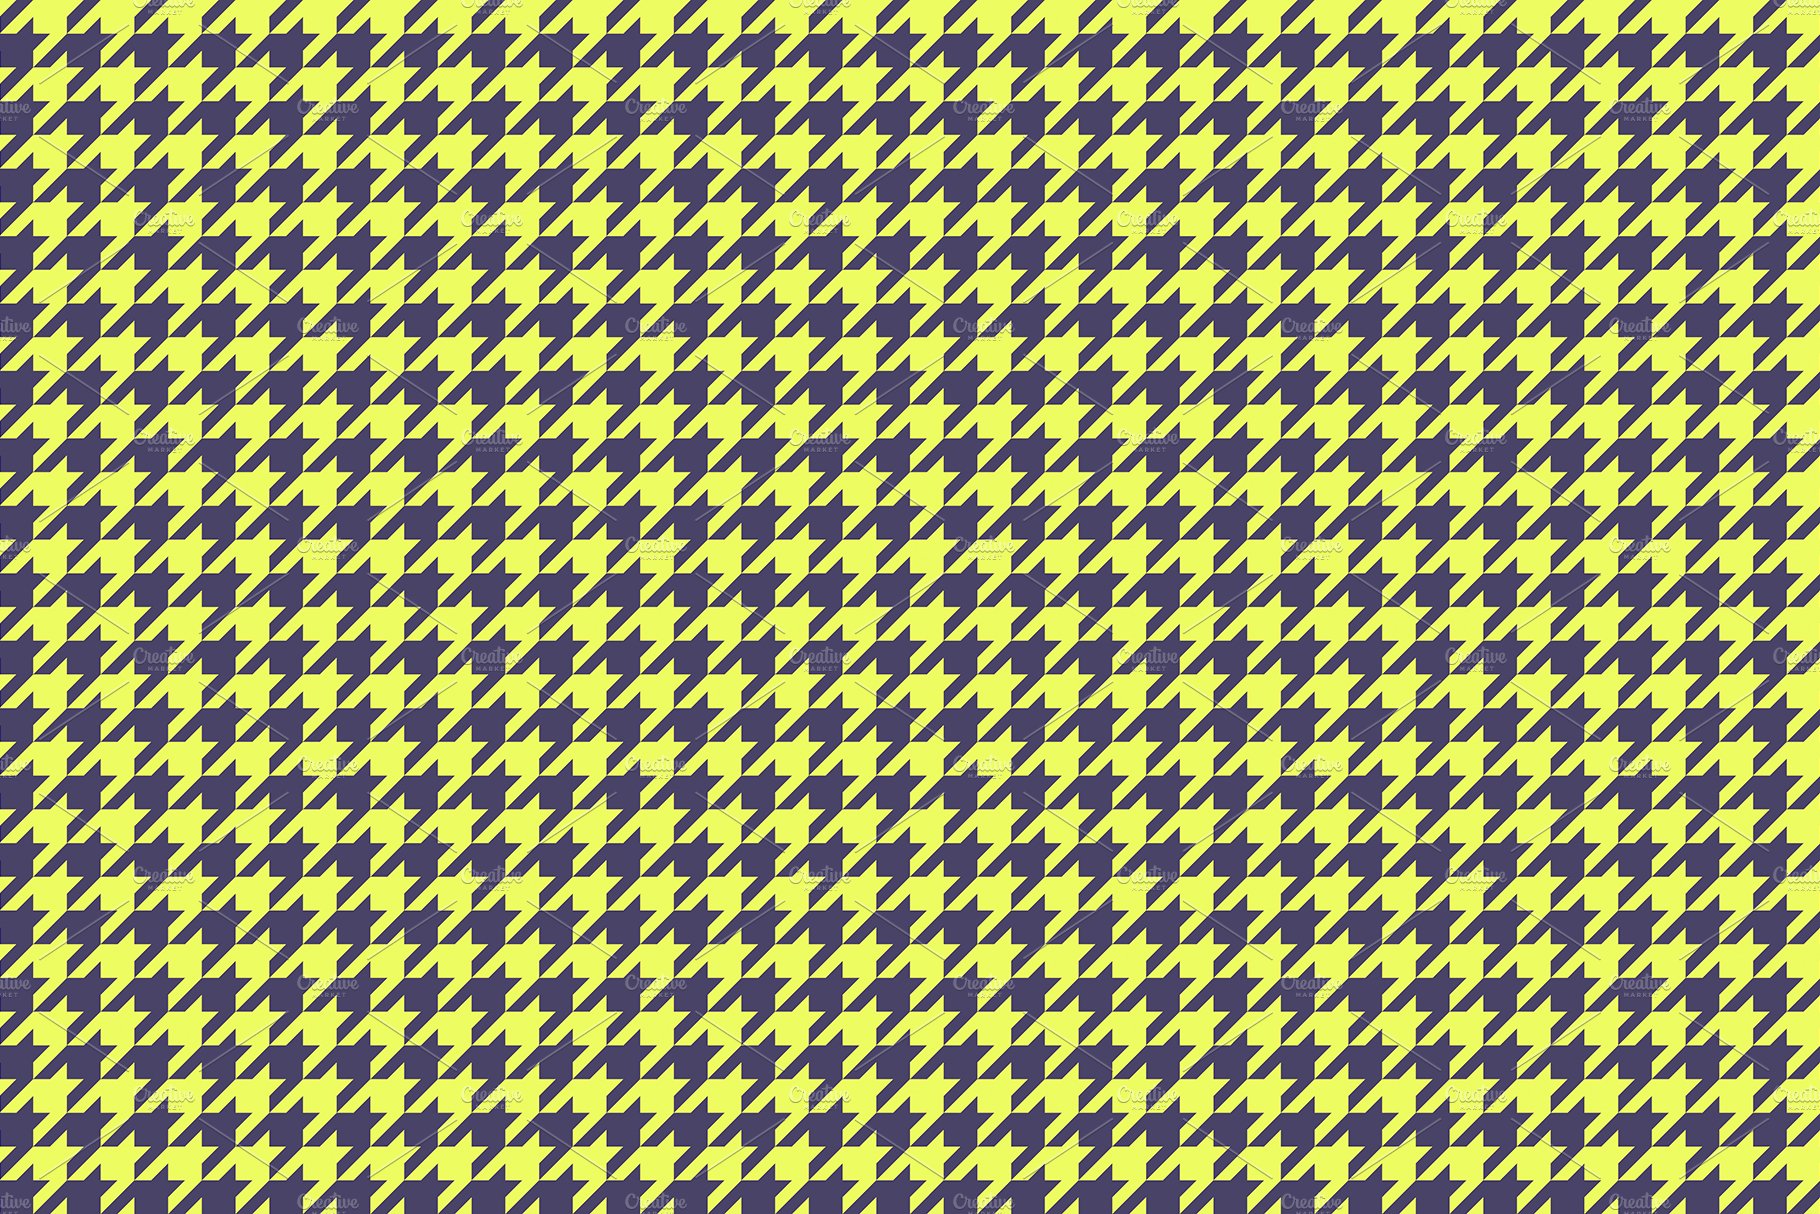 10 houndstooth pattern background texture copy 626